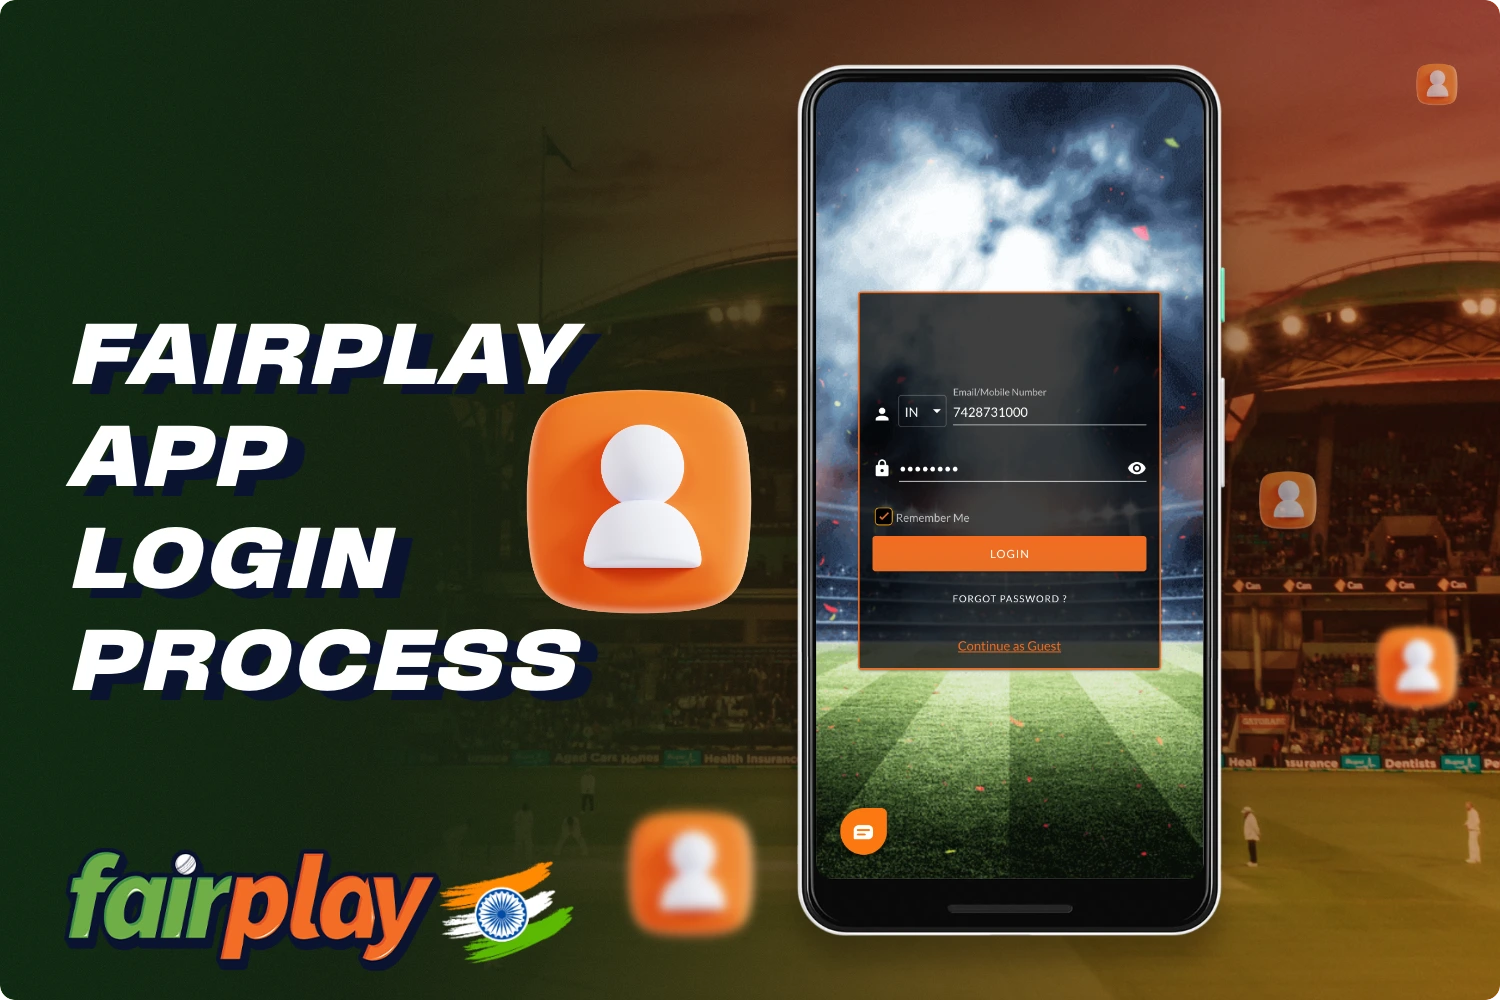 Logging in to your personal Fairplay account via the app is no different from the same process on the website